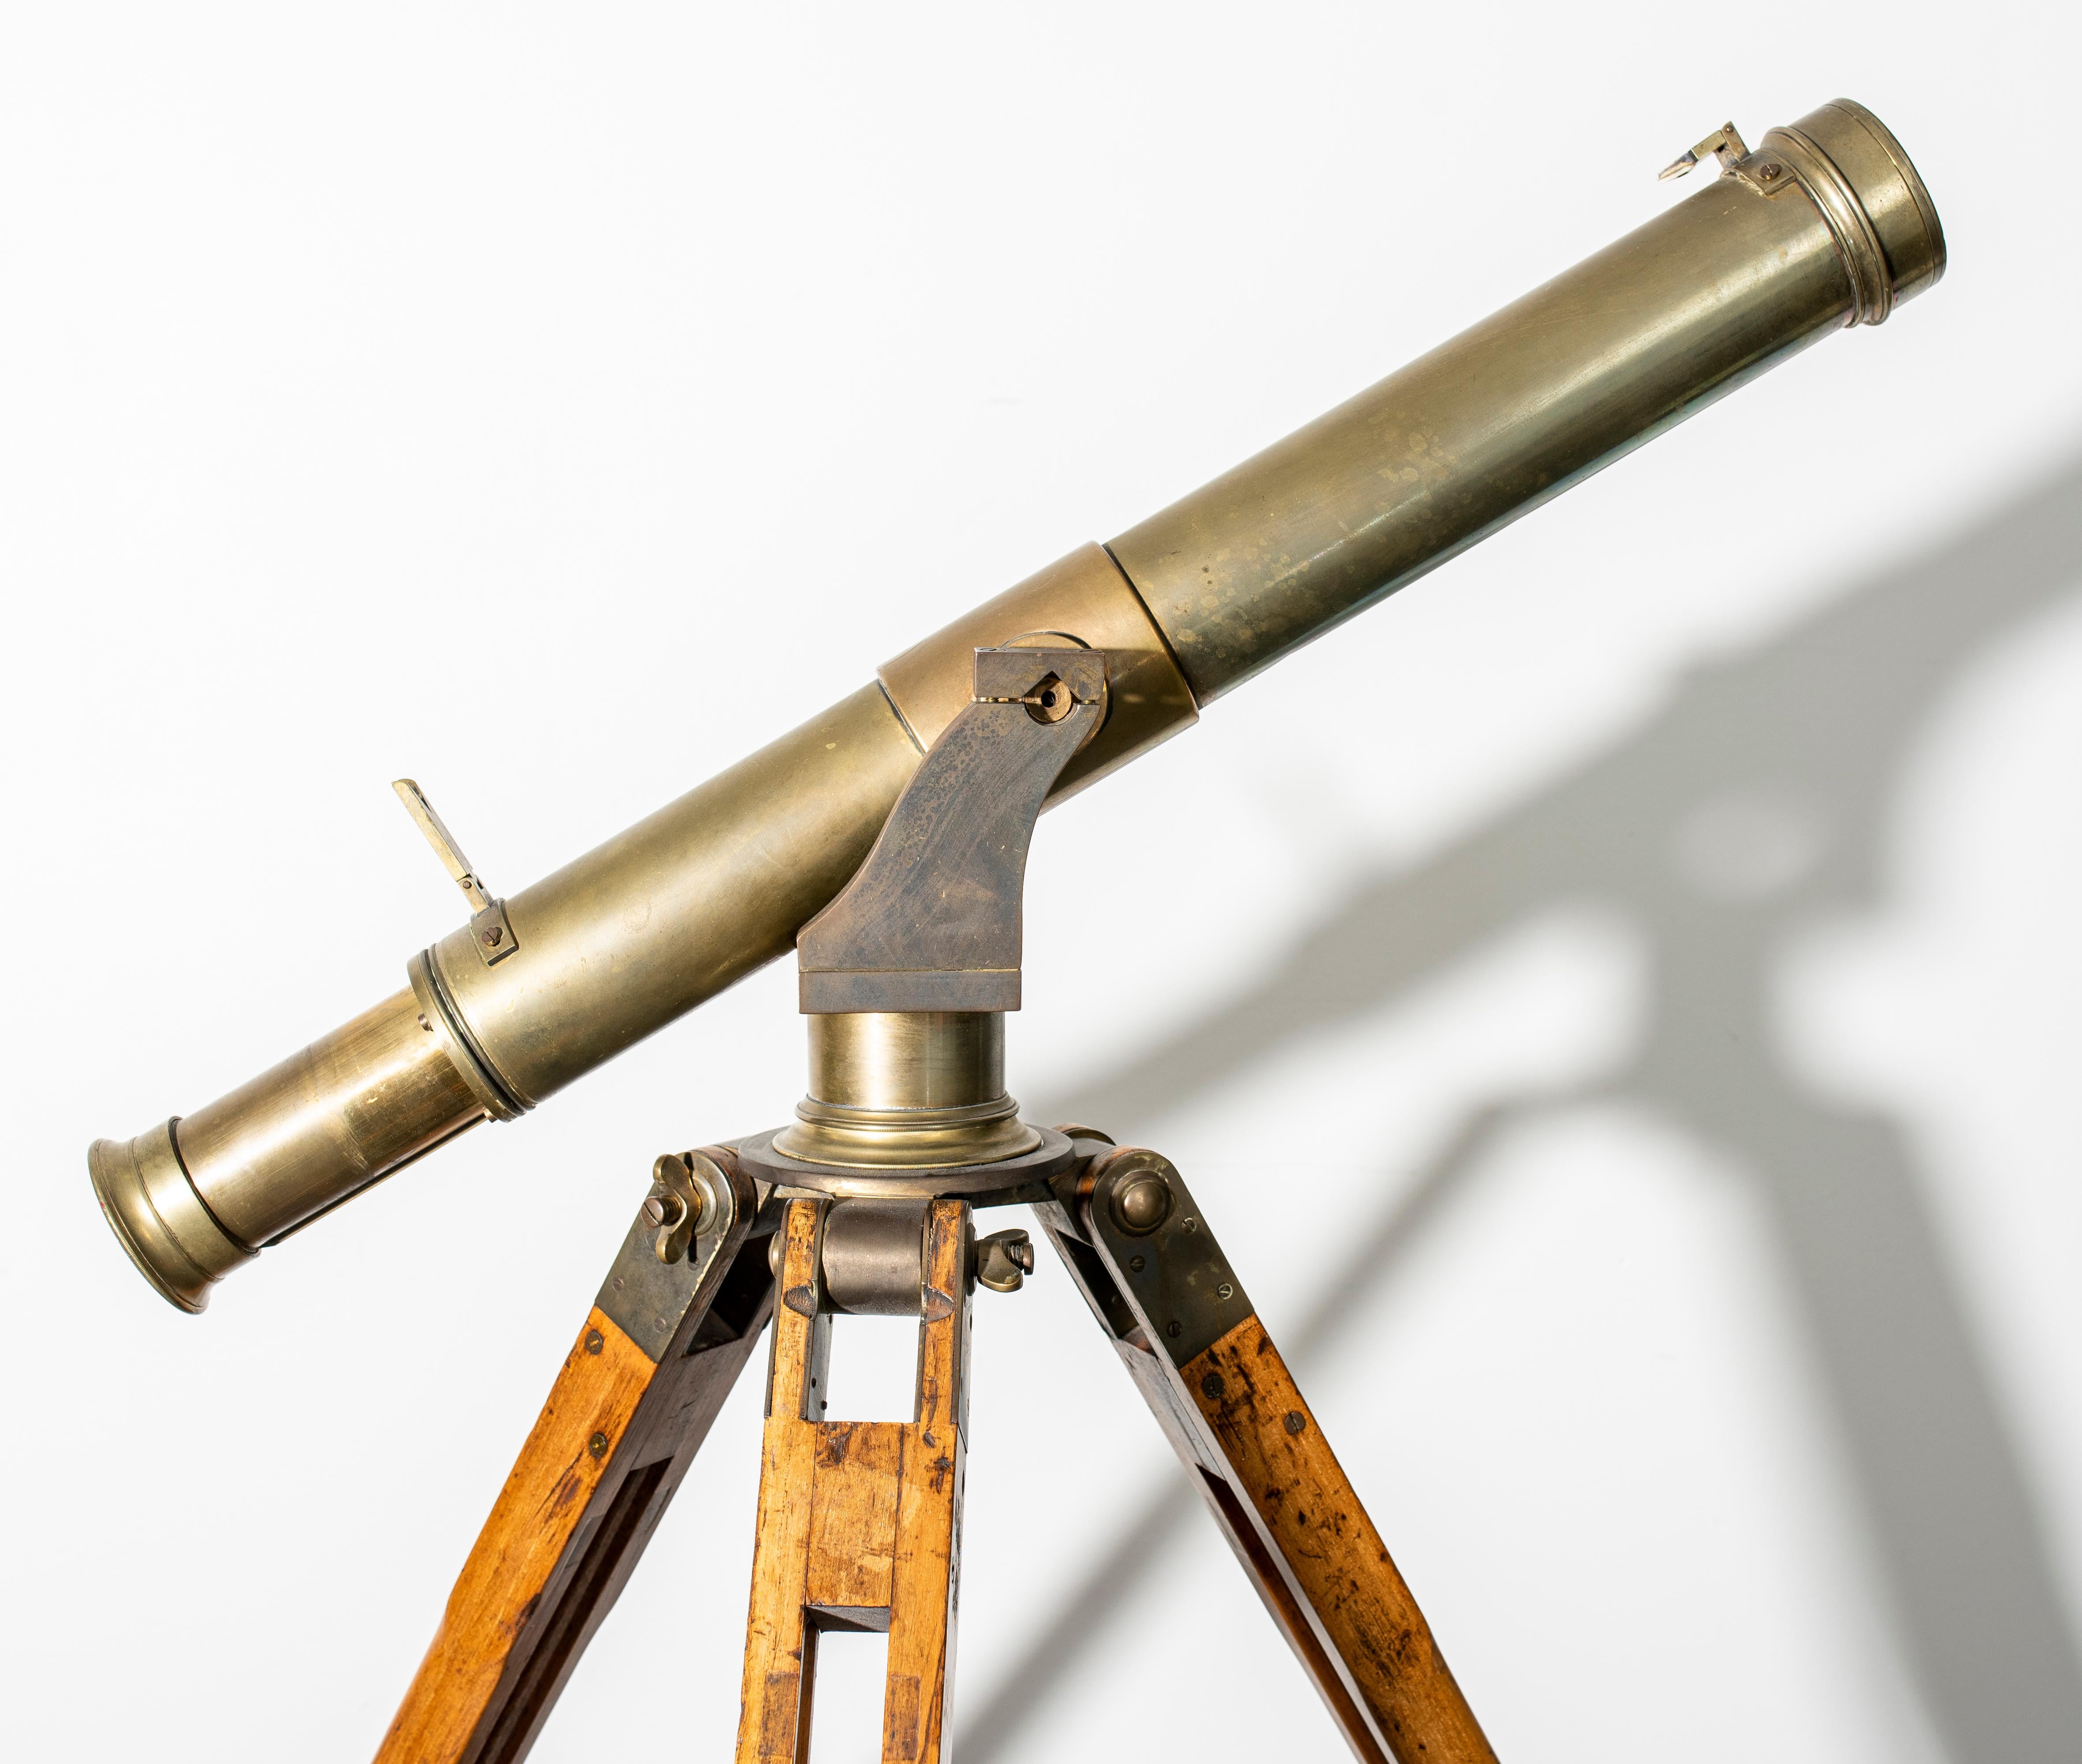 Antique brass telescope on adjustable tripod stand base, possibly English, unsigned. Measures: 47” H x 43.5” diameter.